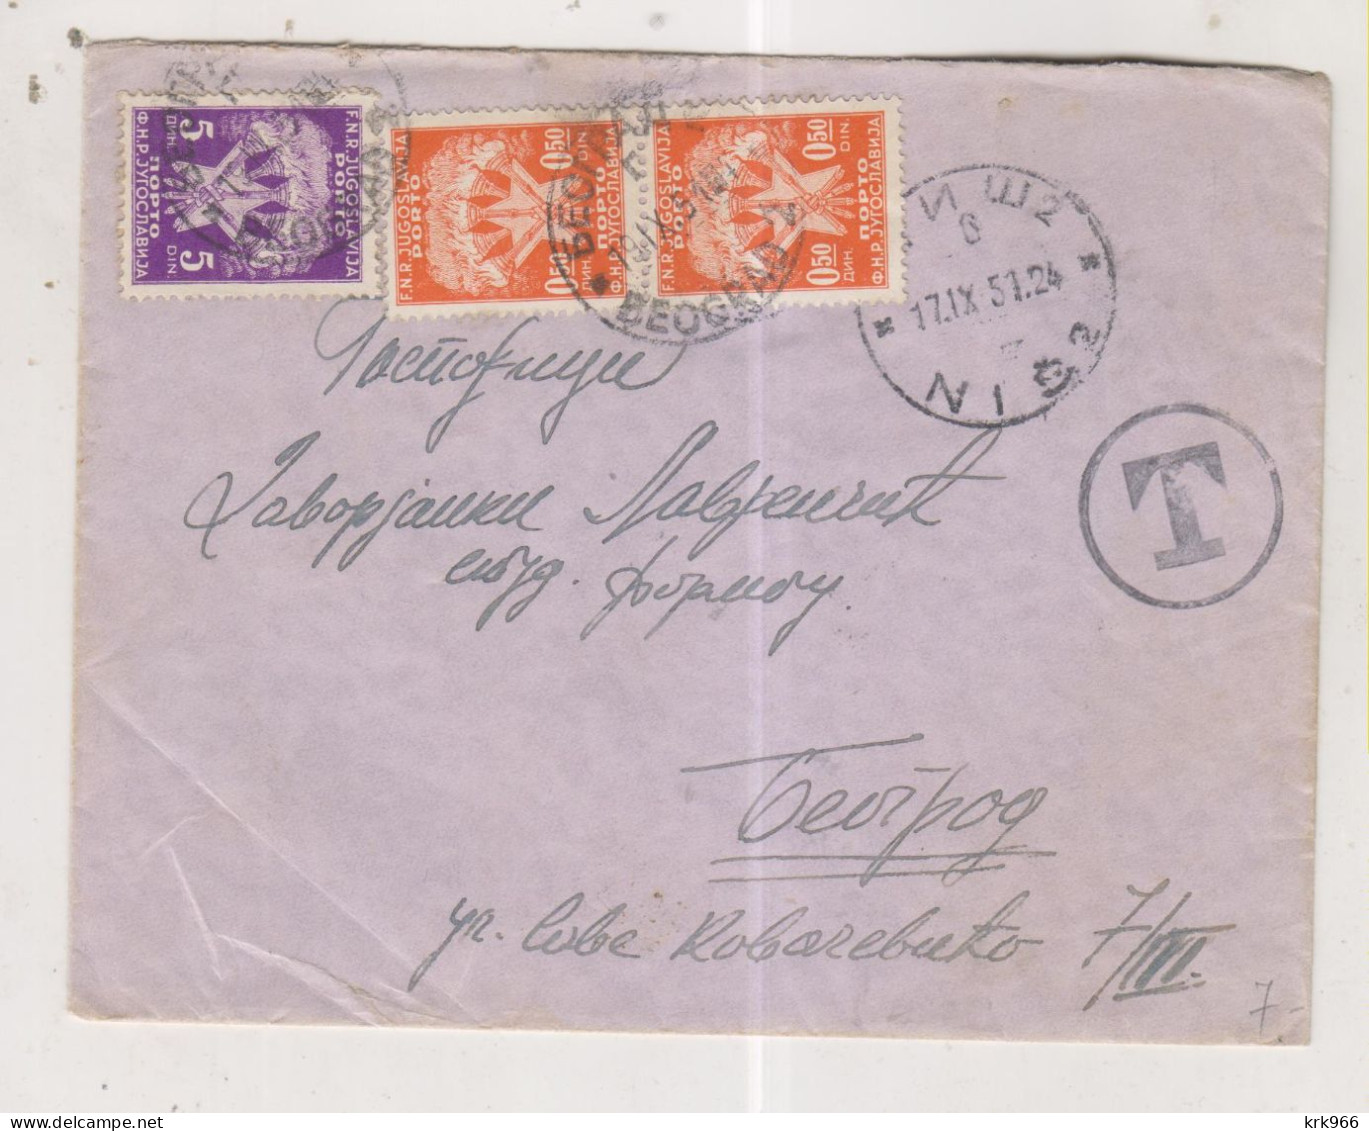 YUGOSLAVIA,1951 NIS Nice Cover To Beograd Postage Due - Covers & Documents